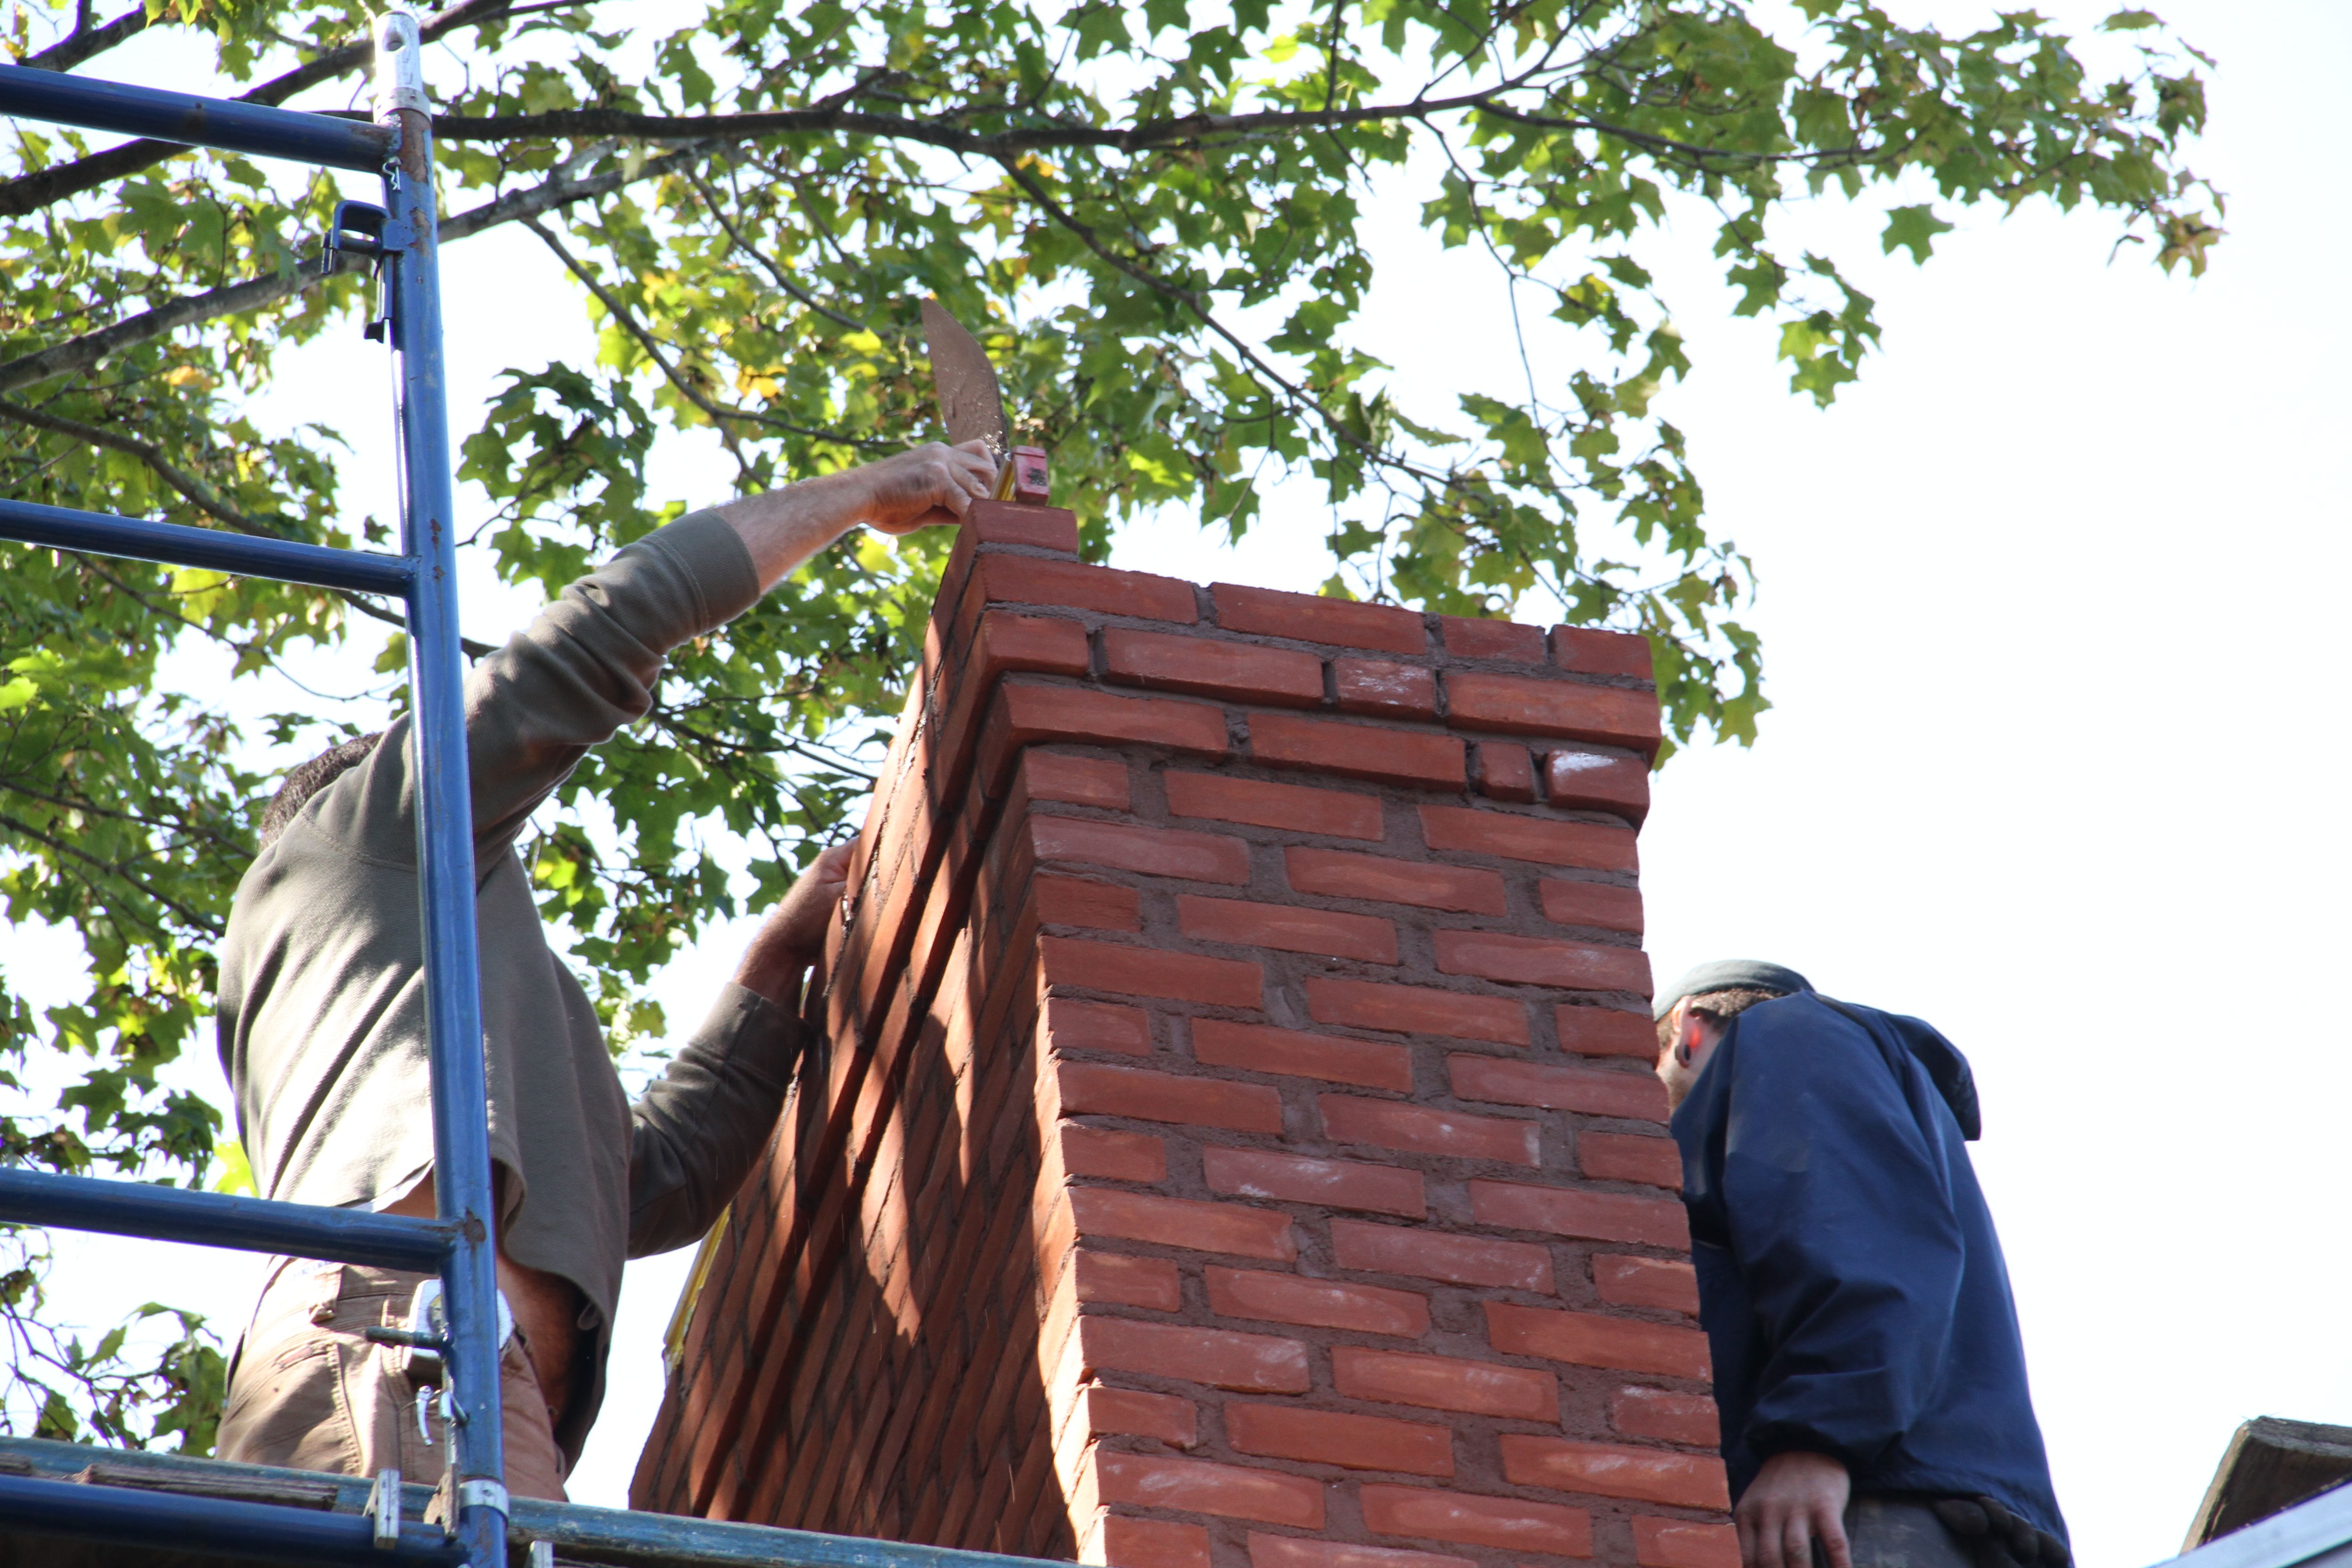 I actually only got to witness them installing the last course of bricks. They moved fast!